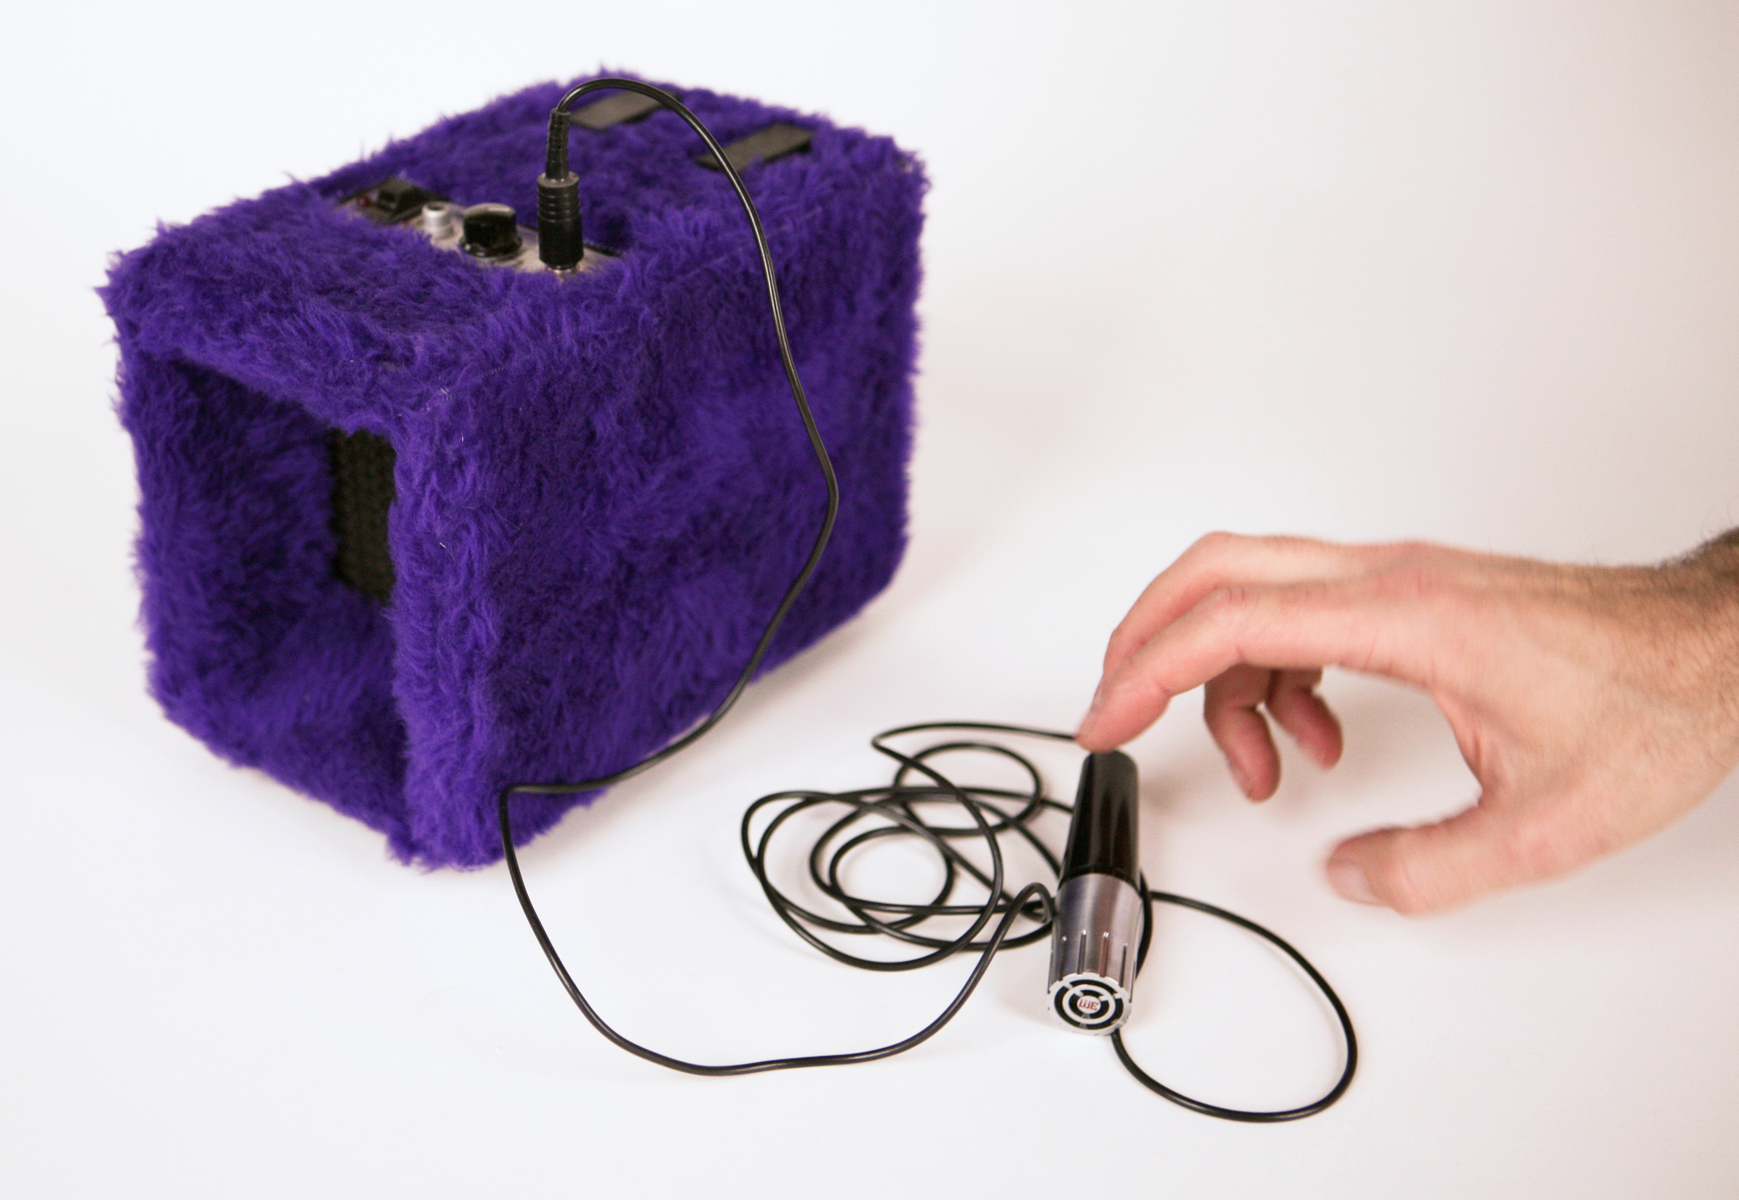 A hand reaches for a microphone plugged into a purple fur covered box device.